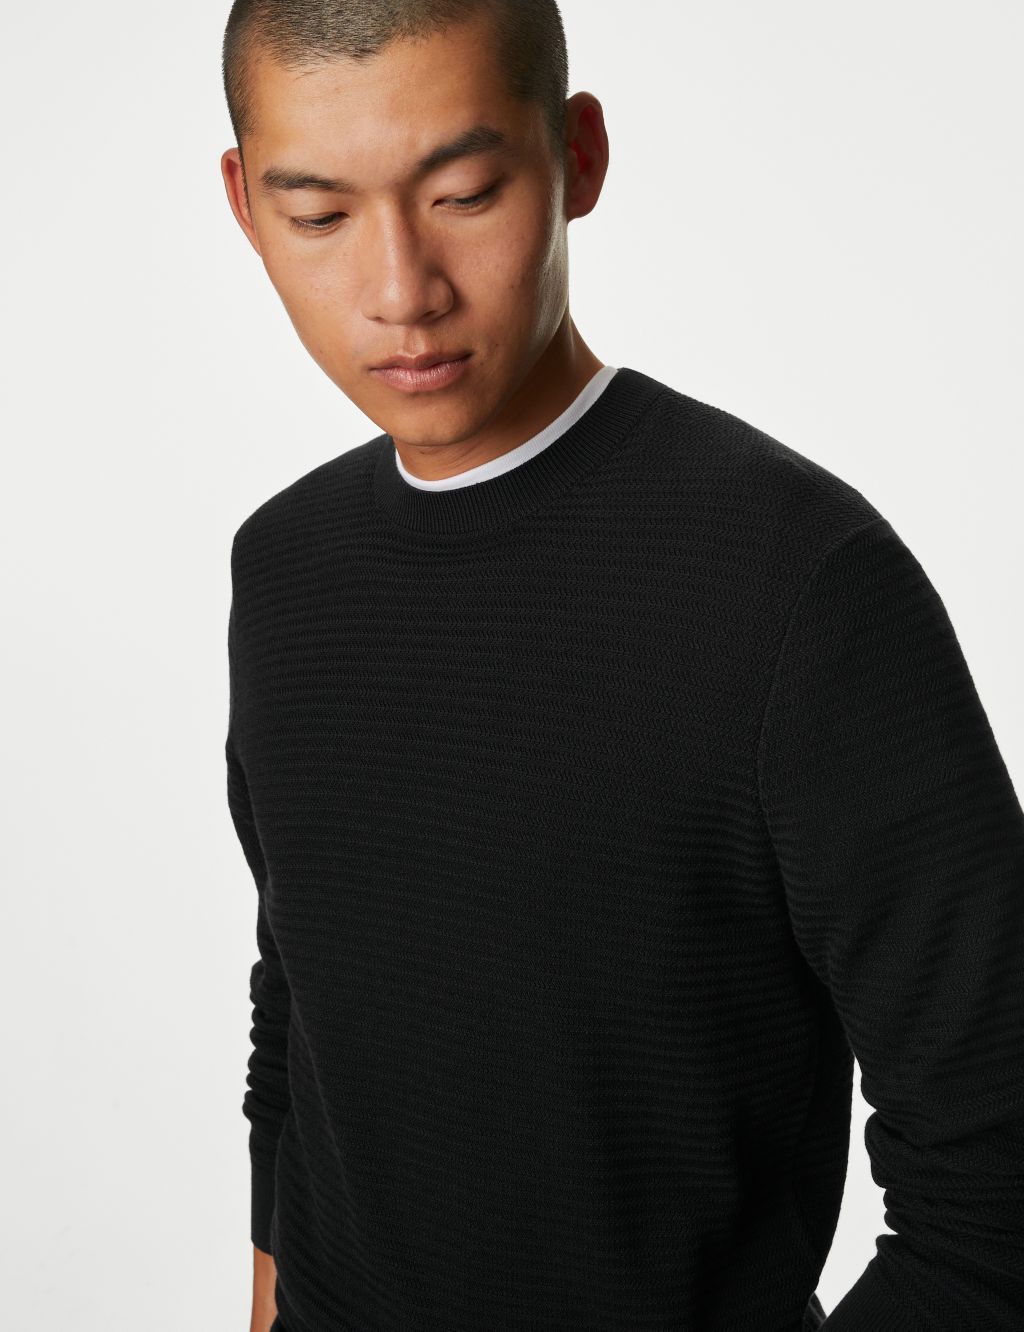 Cotton and Modal Blend Textured Crew Neck Jumper image 3